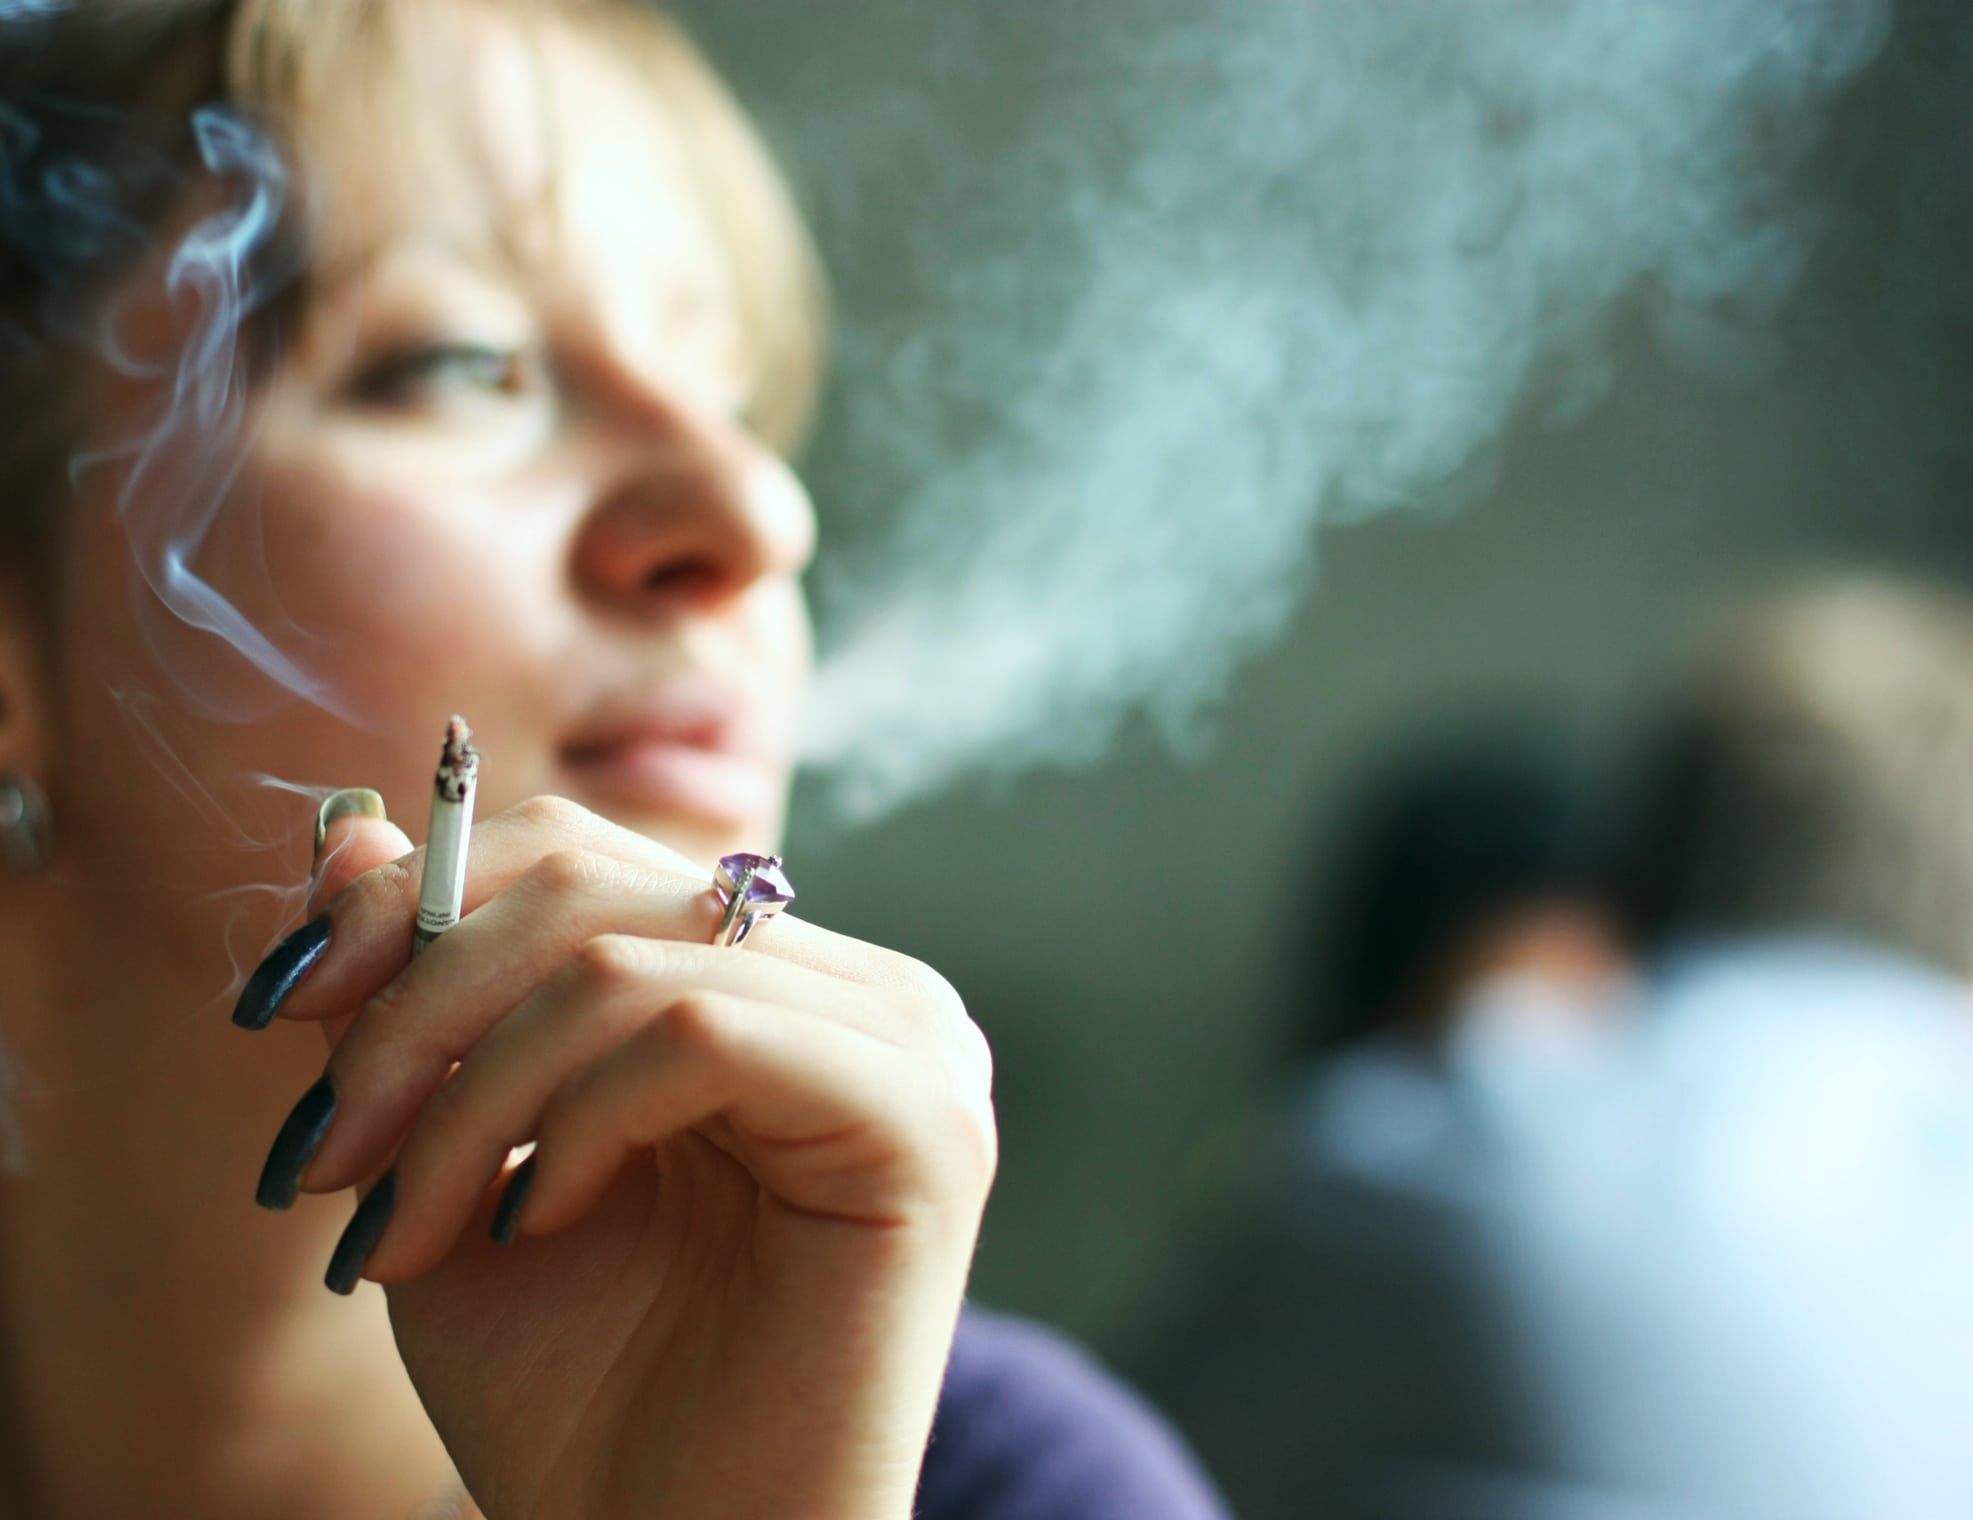 What effect does nicotine have on your brain? - spunout